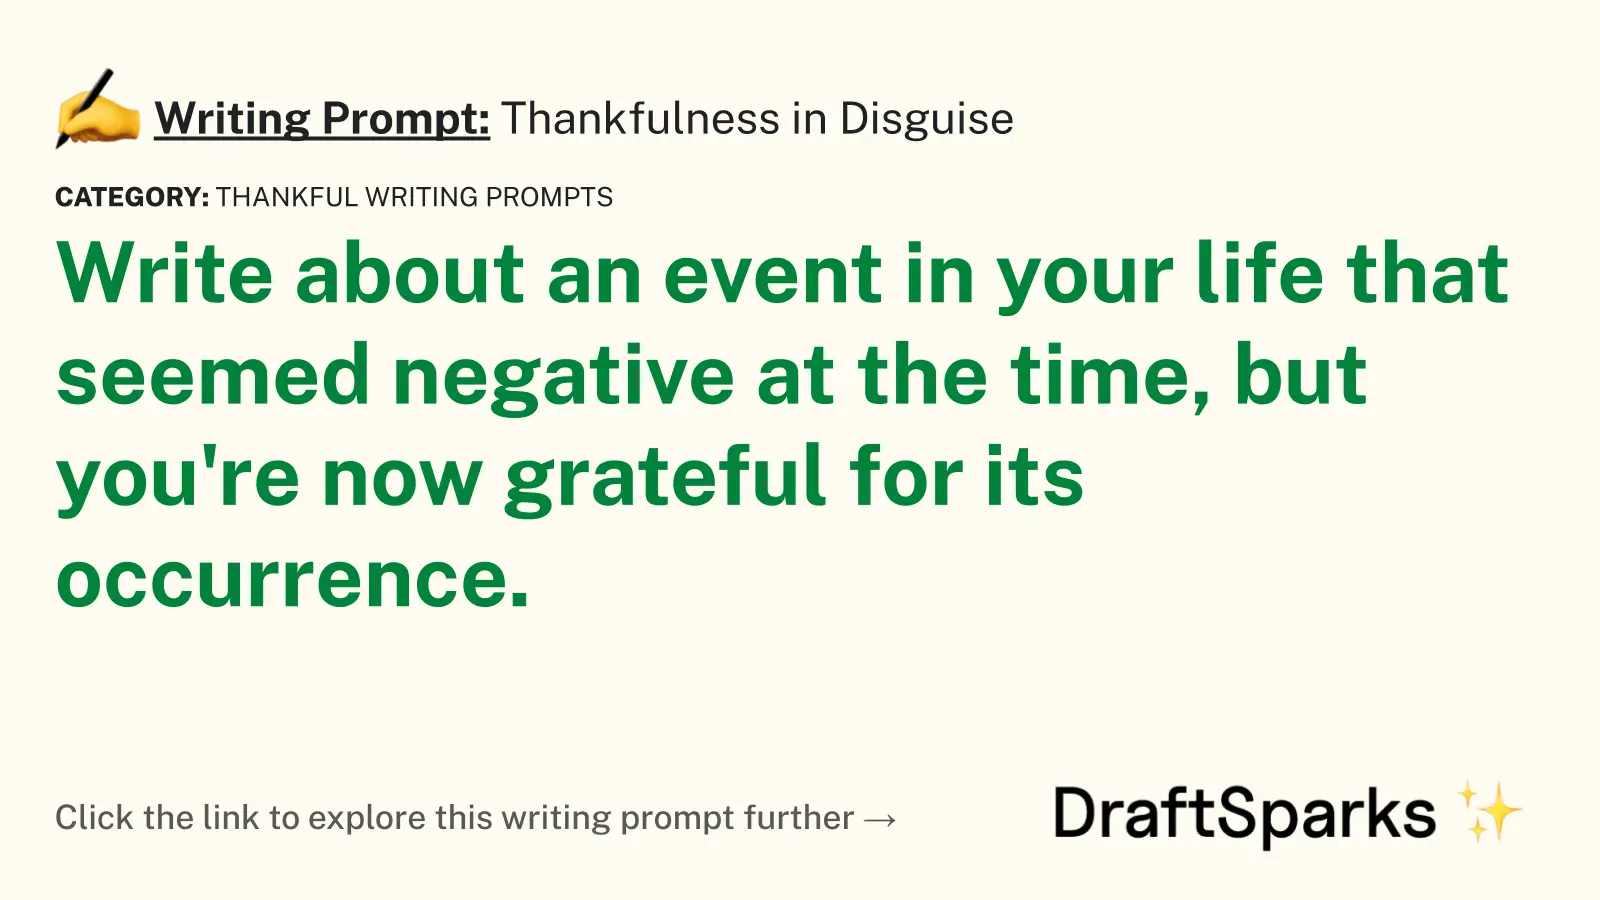 Thankfulness in Disguise